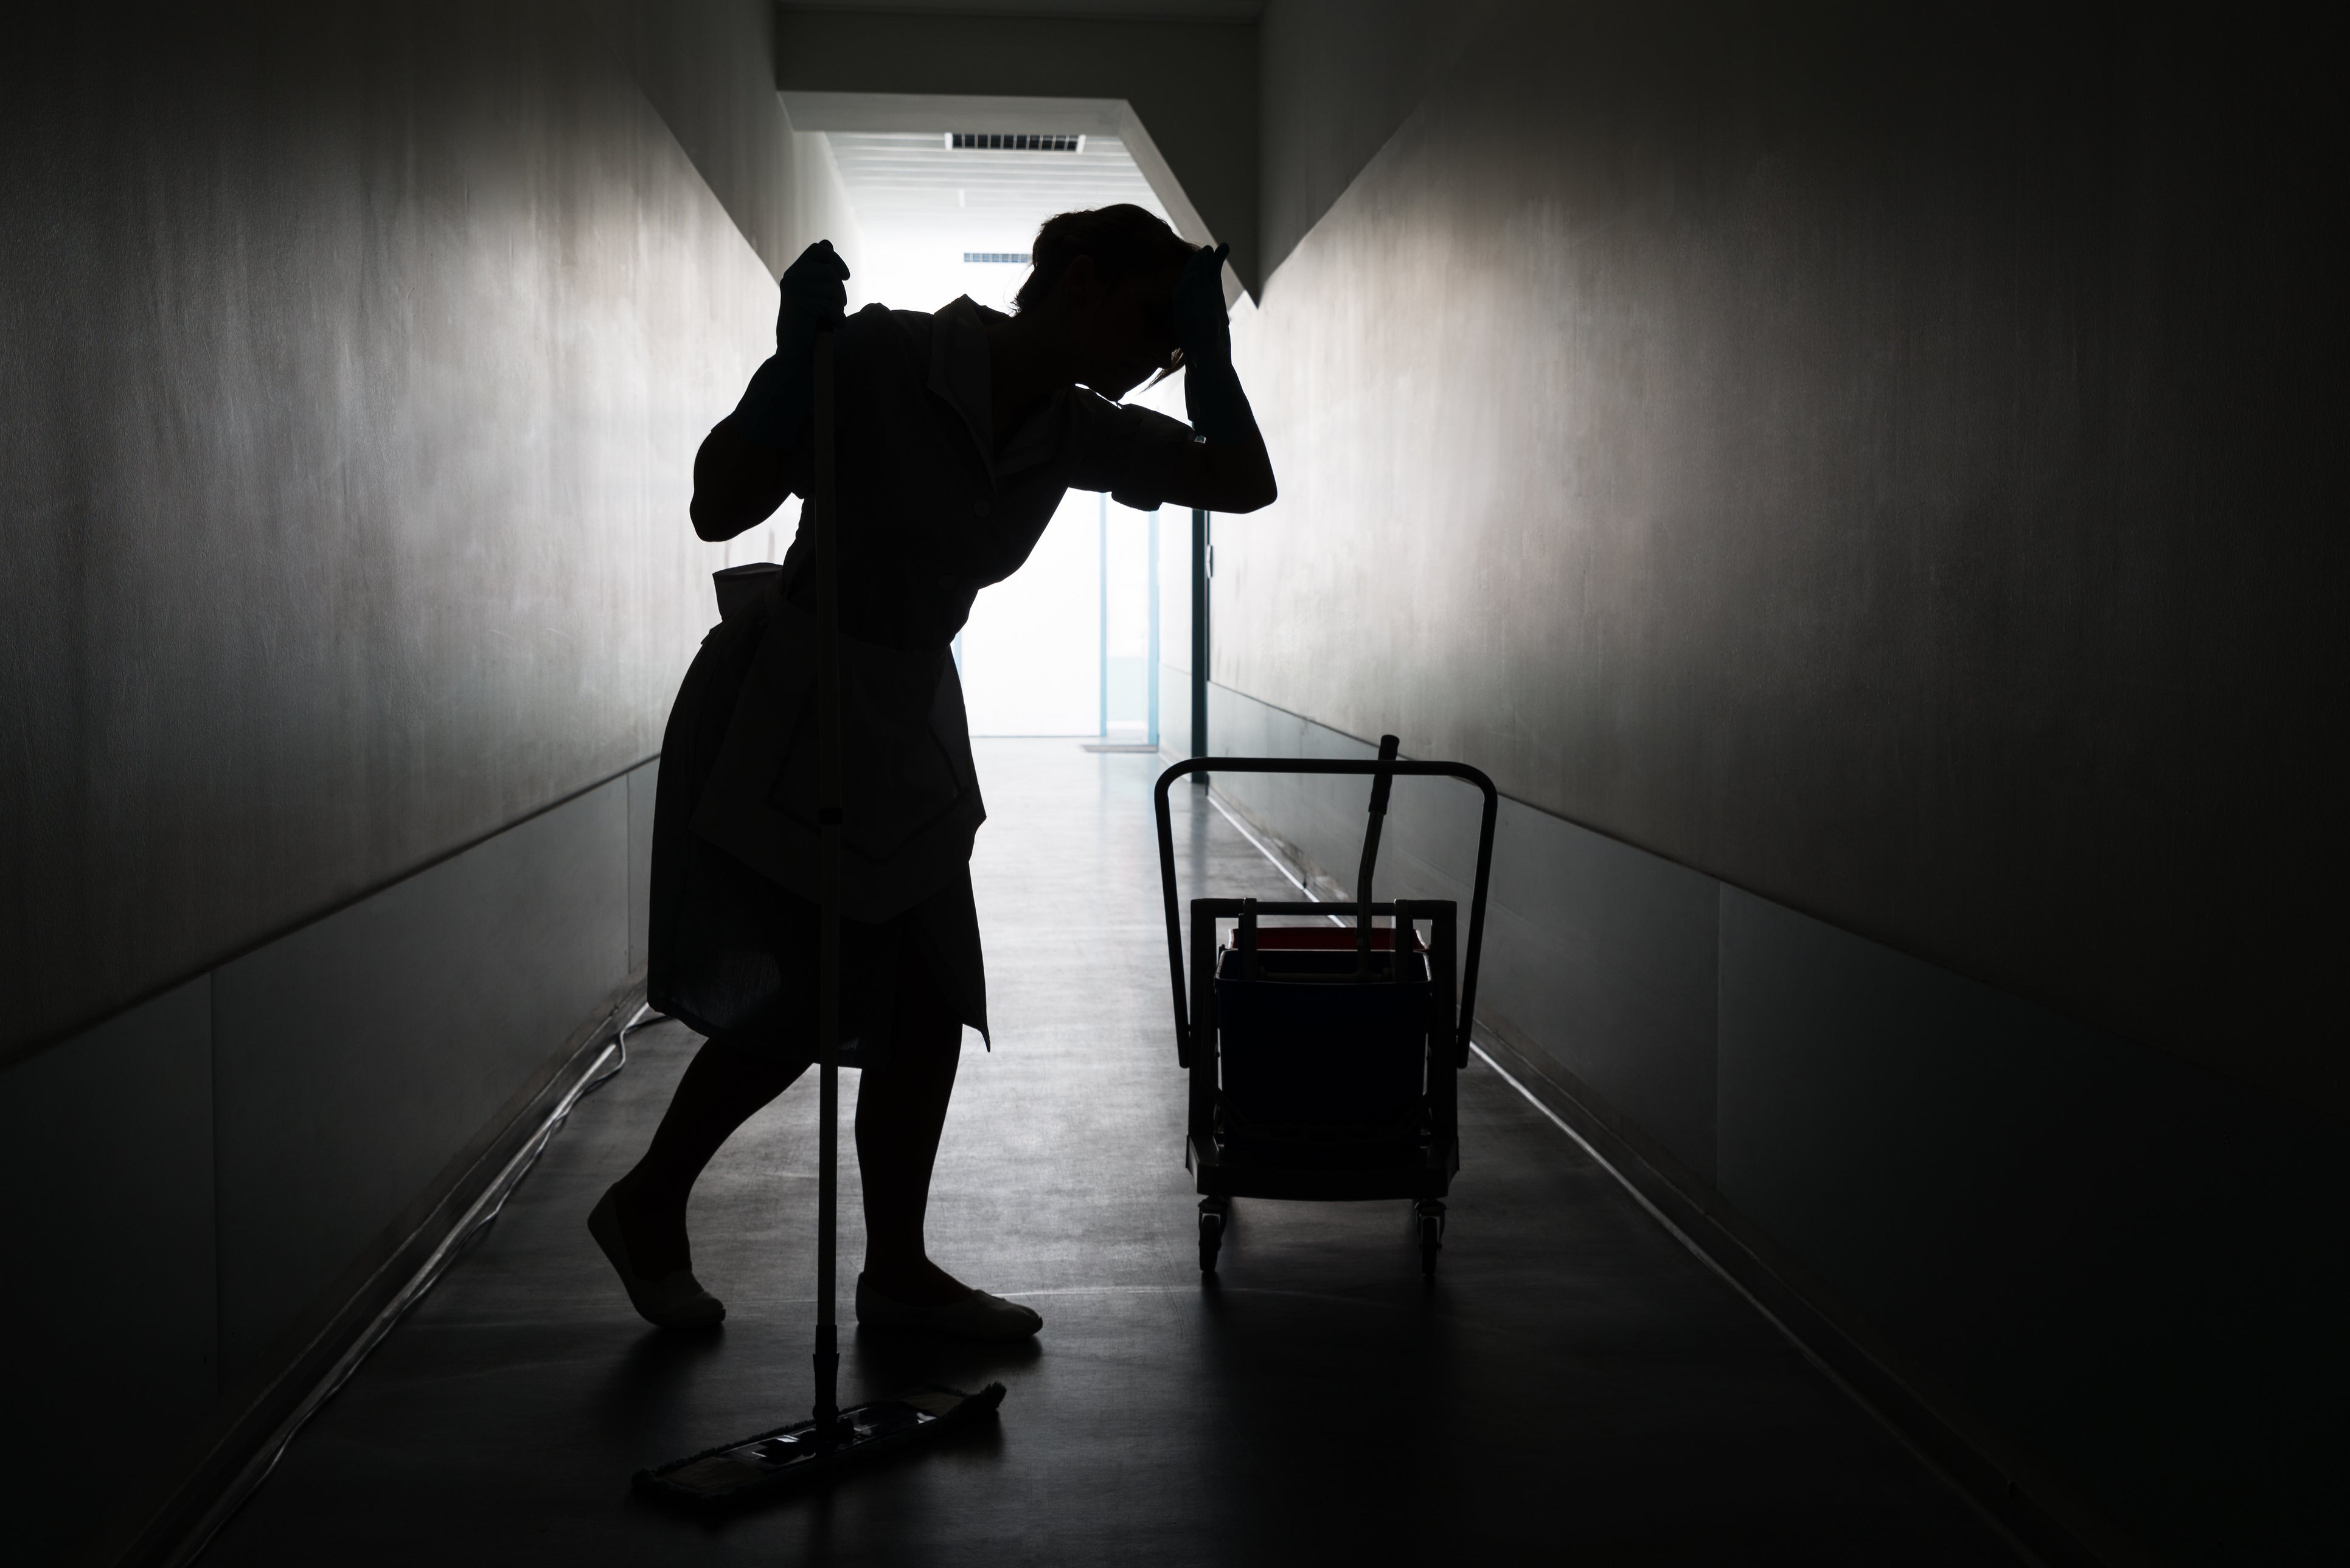 Foreign maids are often accused of stealing or committing ‘immoral’ activities to justify their employers’ abuse